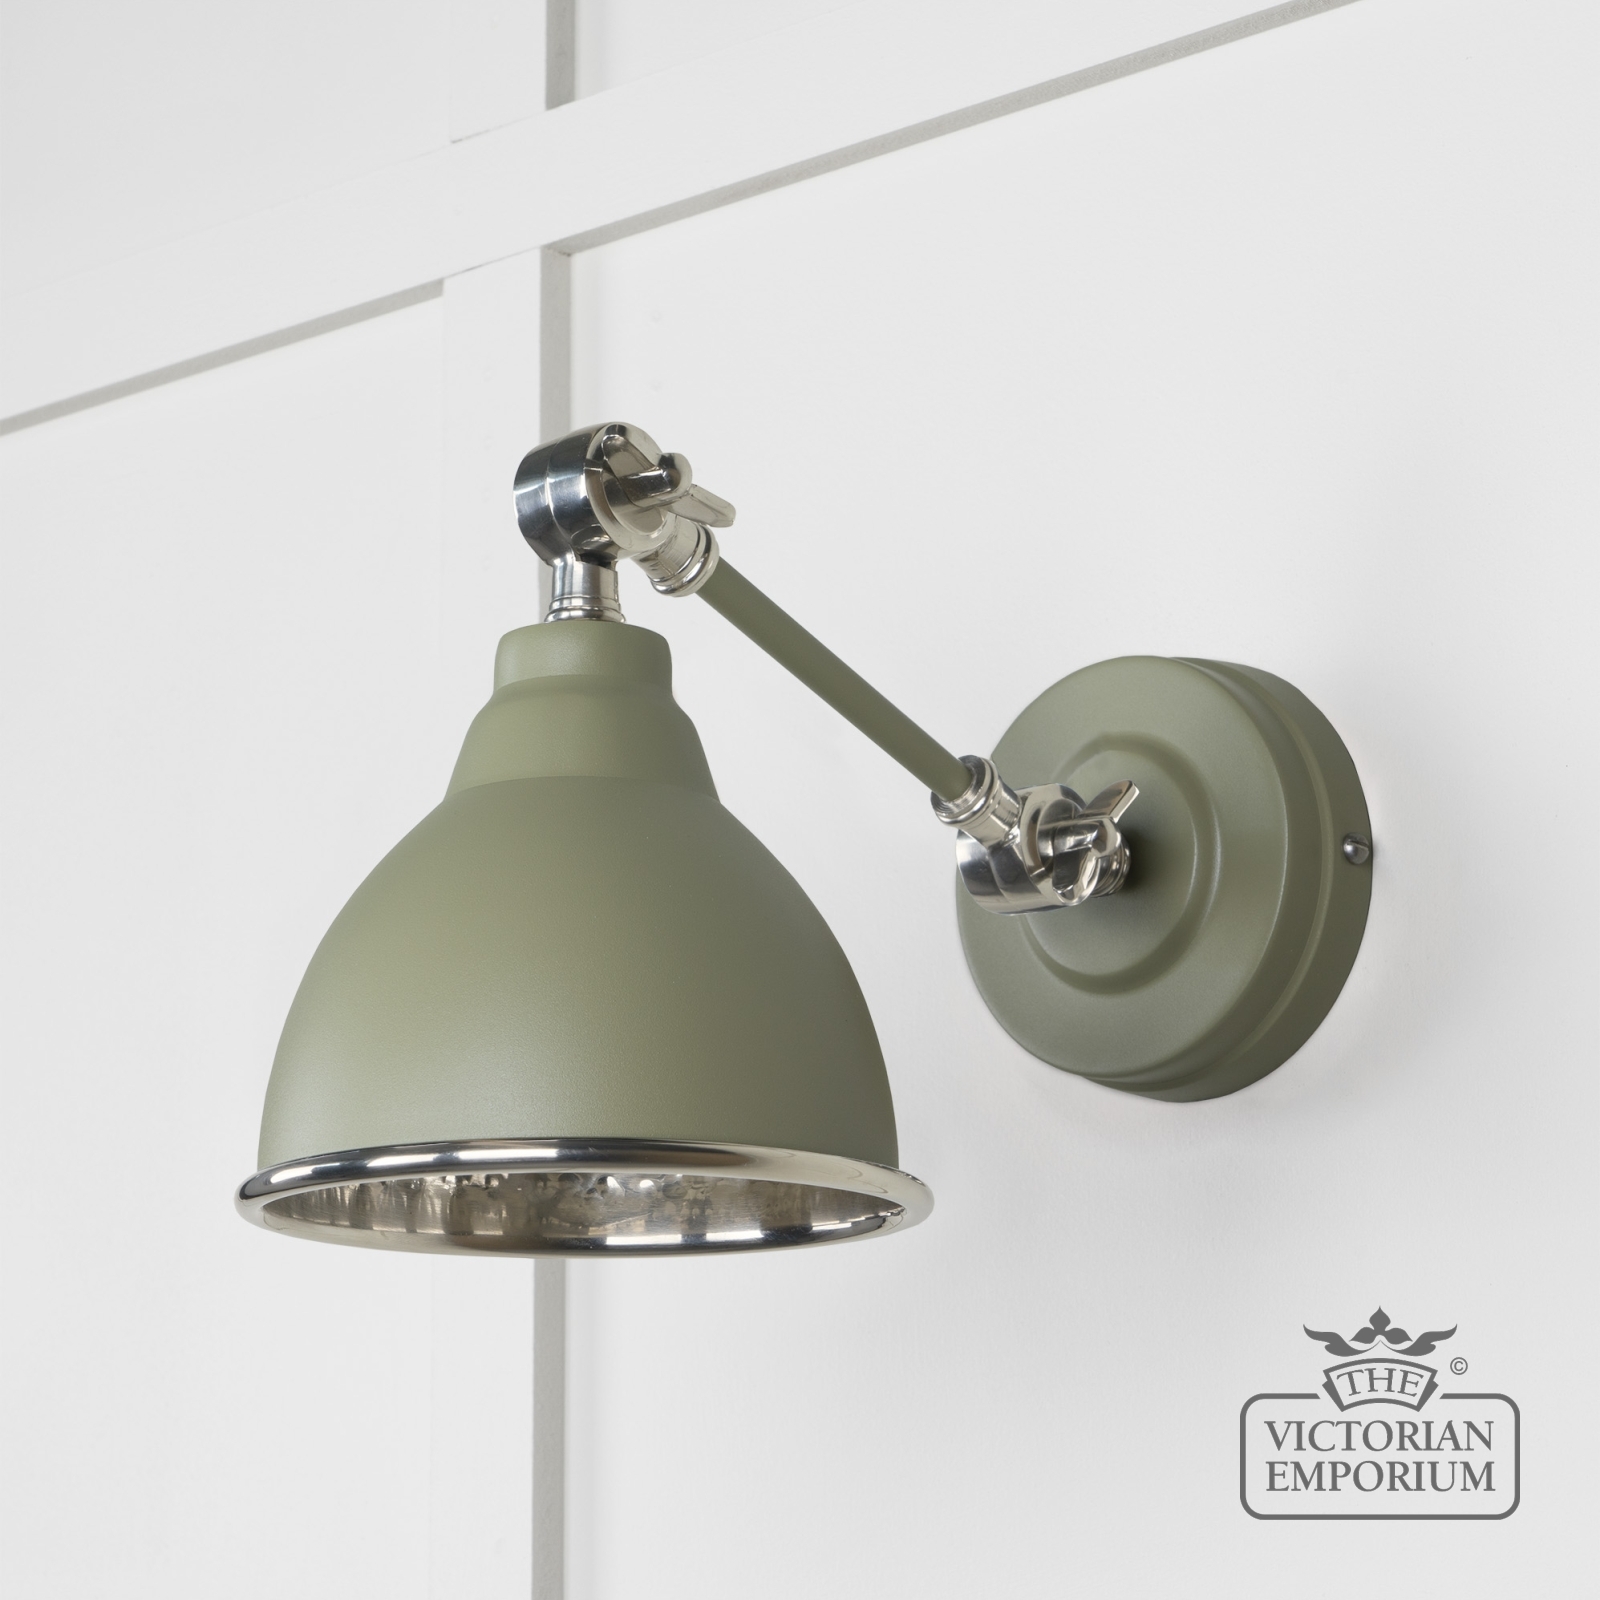 Brindle Wall Light with Hammered Nickel Interior and Tump Exterior